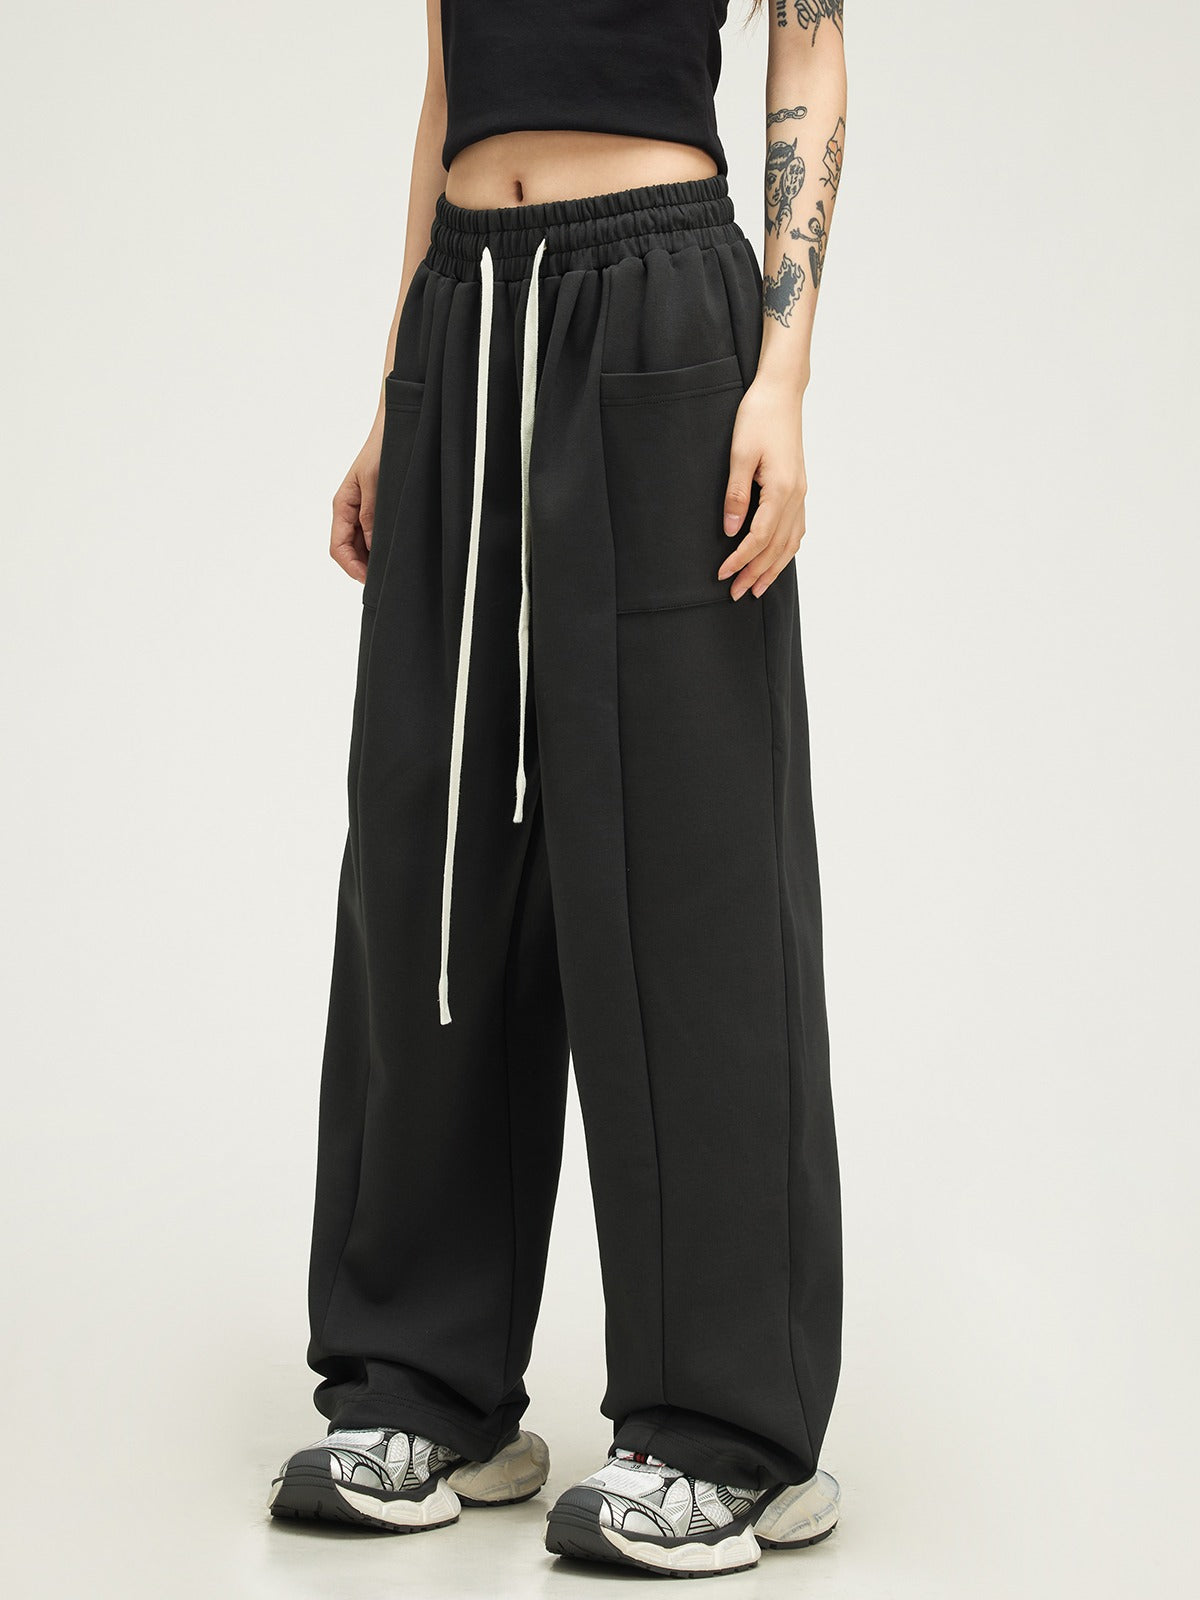 American straight casual pants